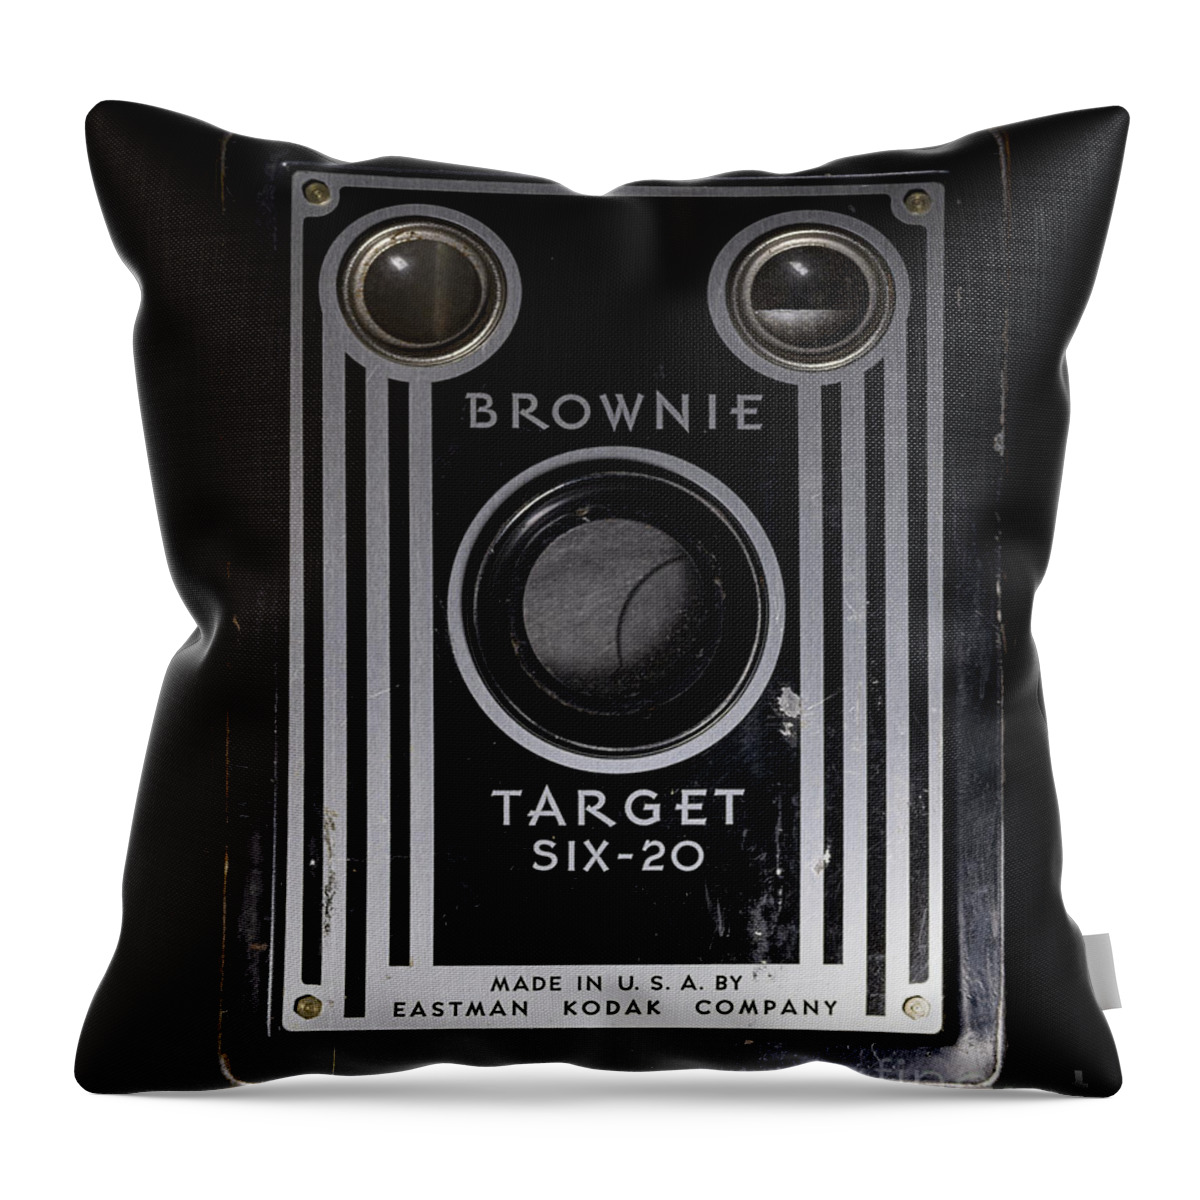 Brownie Camera Throw Pillow featuring the photograph Brownie Target Six 20 by Art Whitton